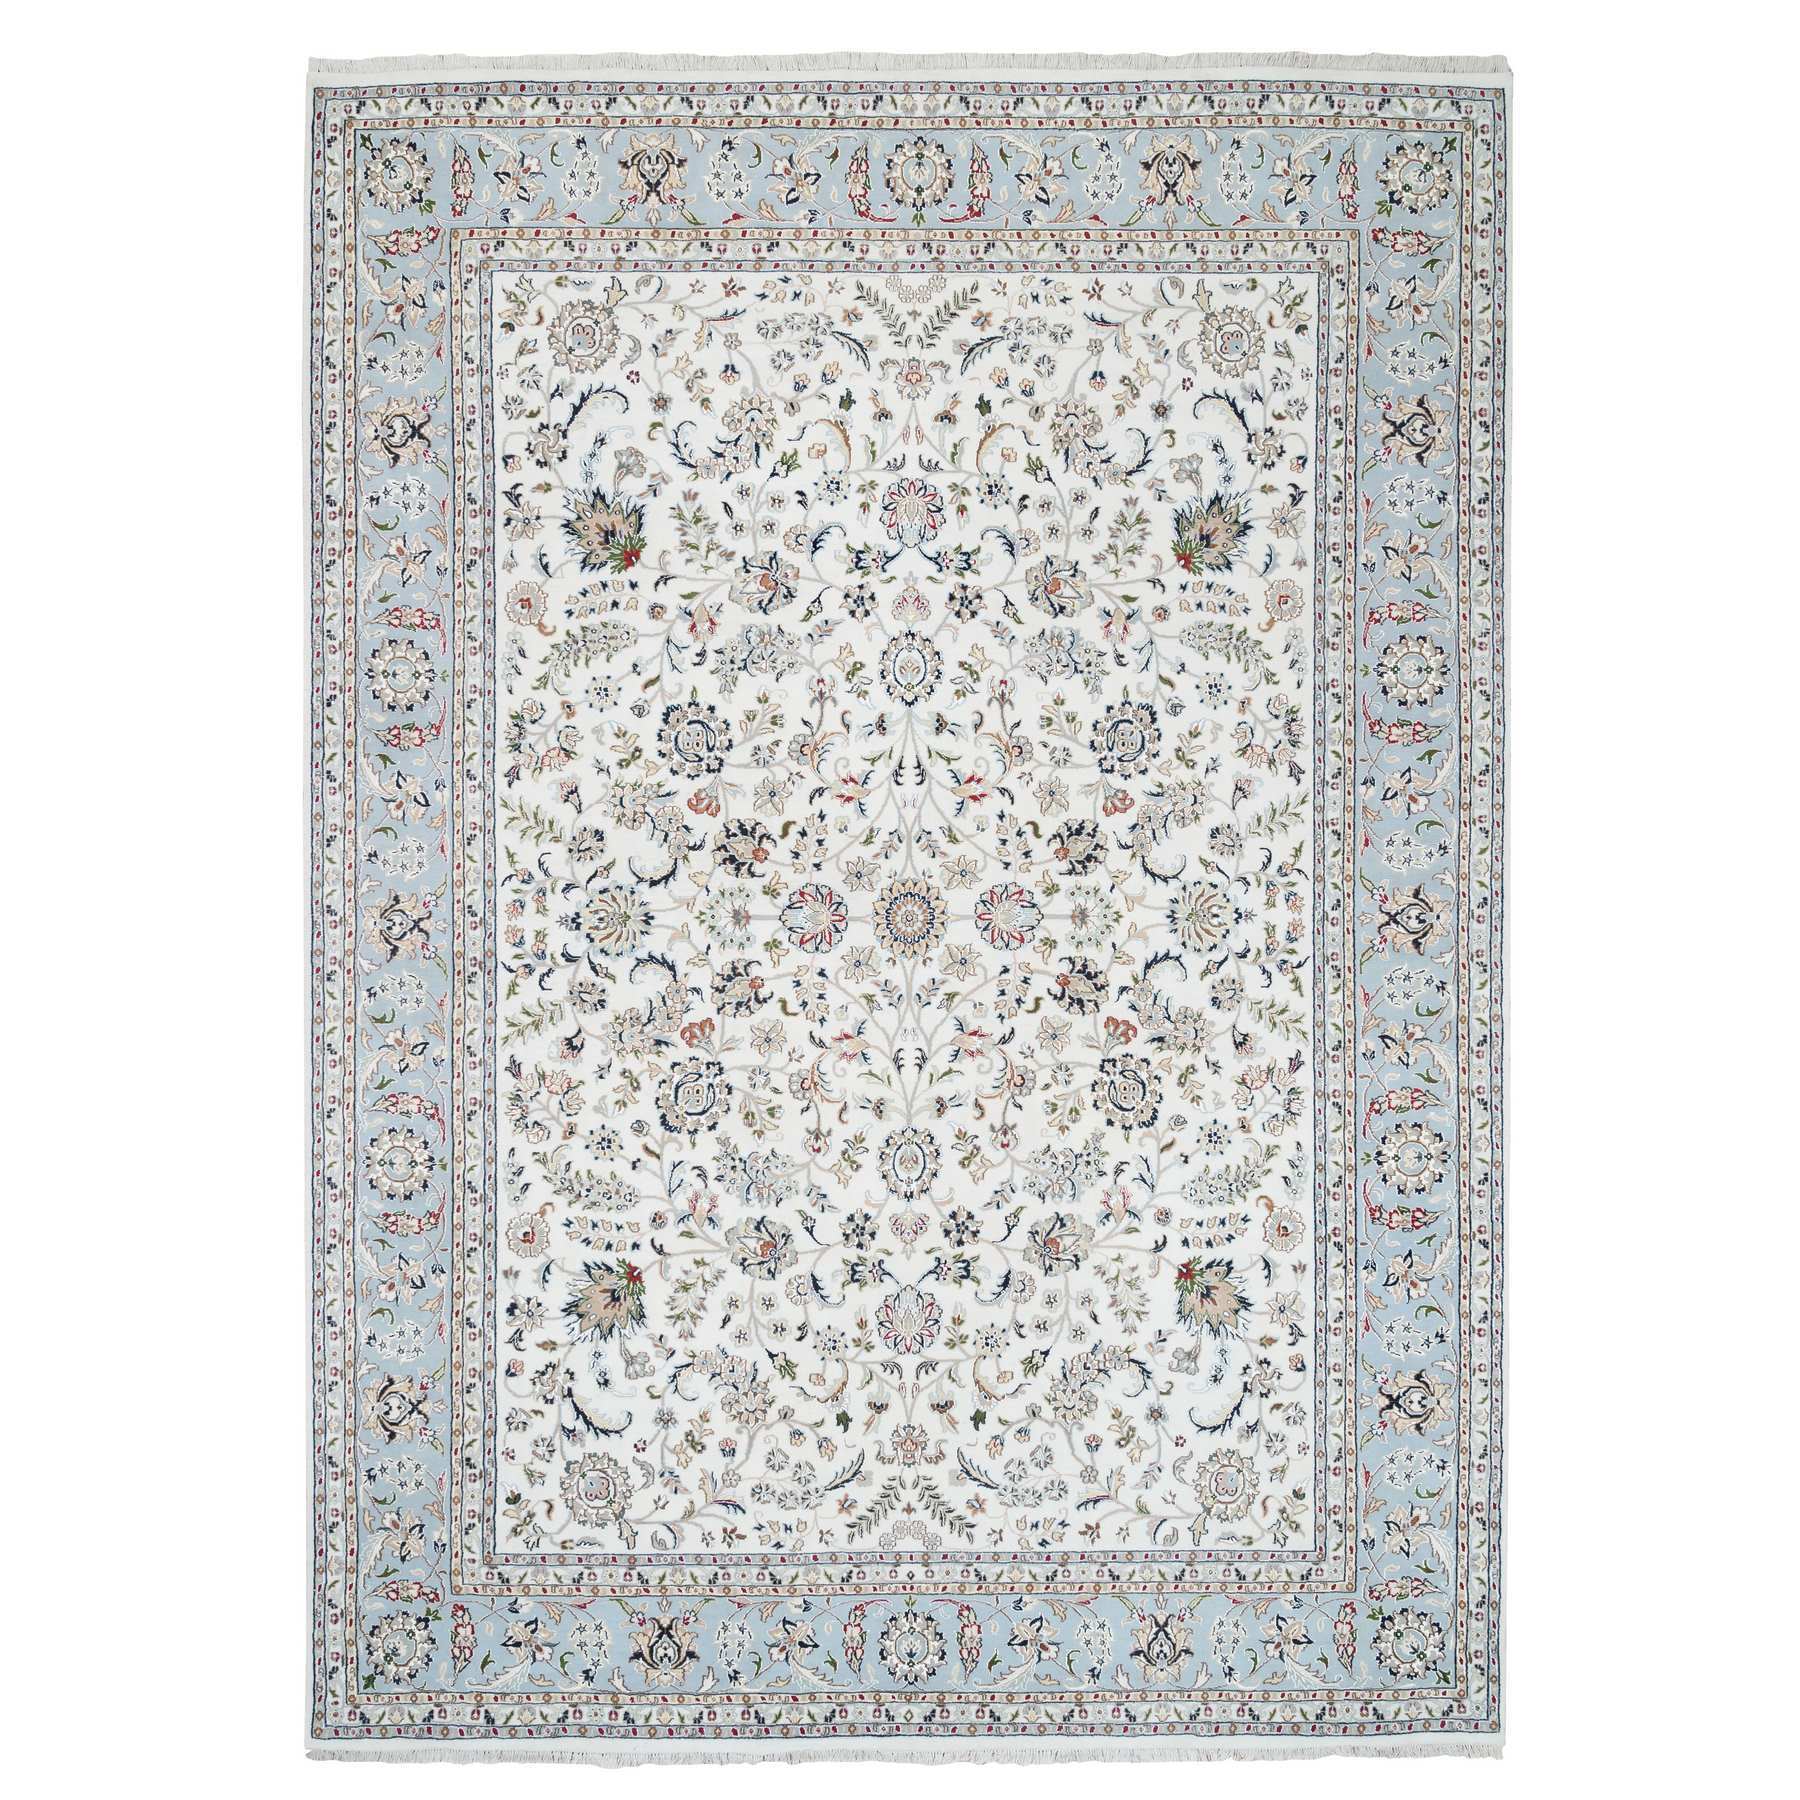 8'10"x12'4" Ivory Nain with All Over Flower Design 250 KPSI Wool and Silk Hand Woven Oriental Rug 